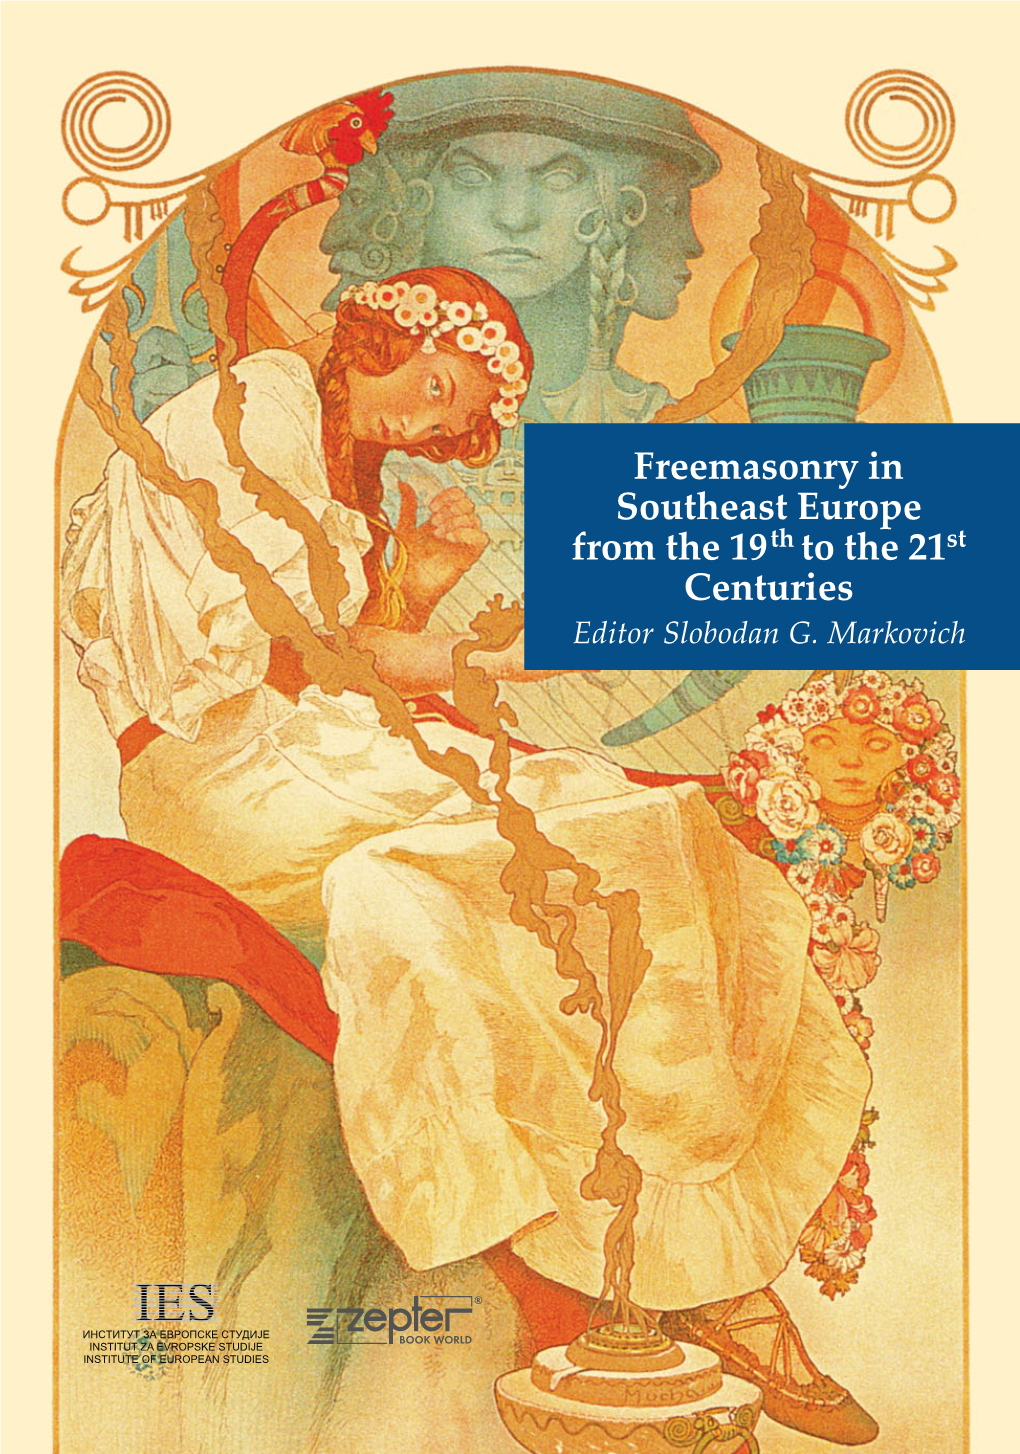 FREEMASONRY in SOUTHEAST EUROPE from the 19TH to the 21ST CENTURIES Edited by Slobodan G